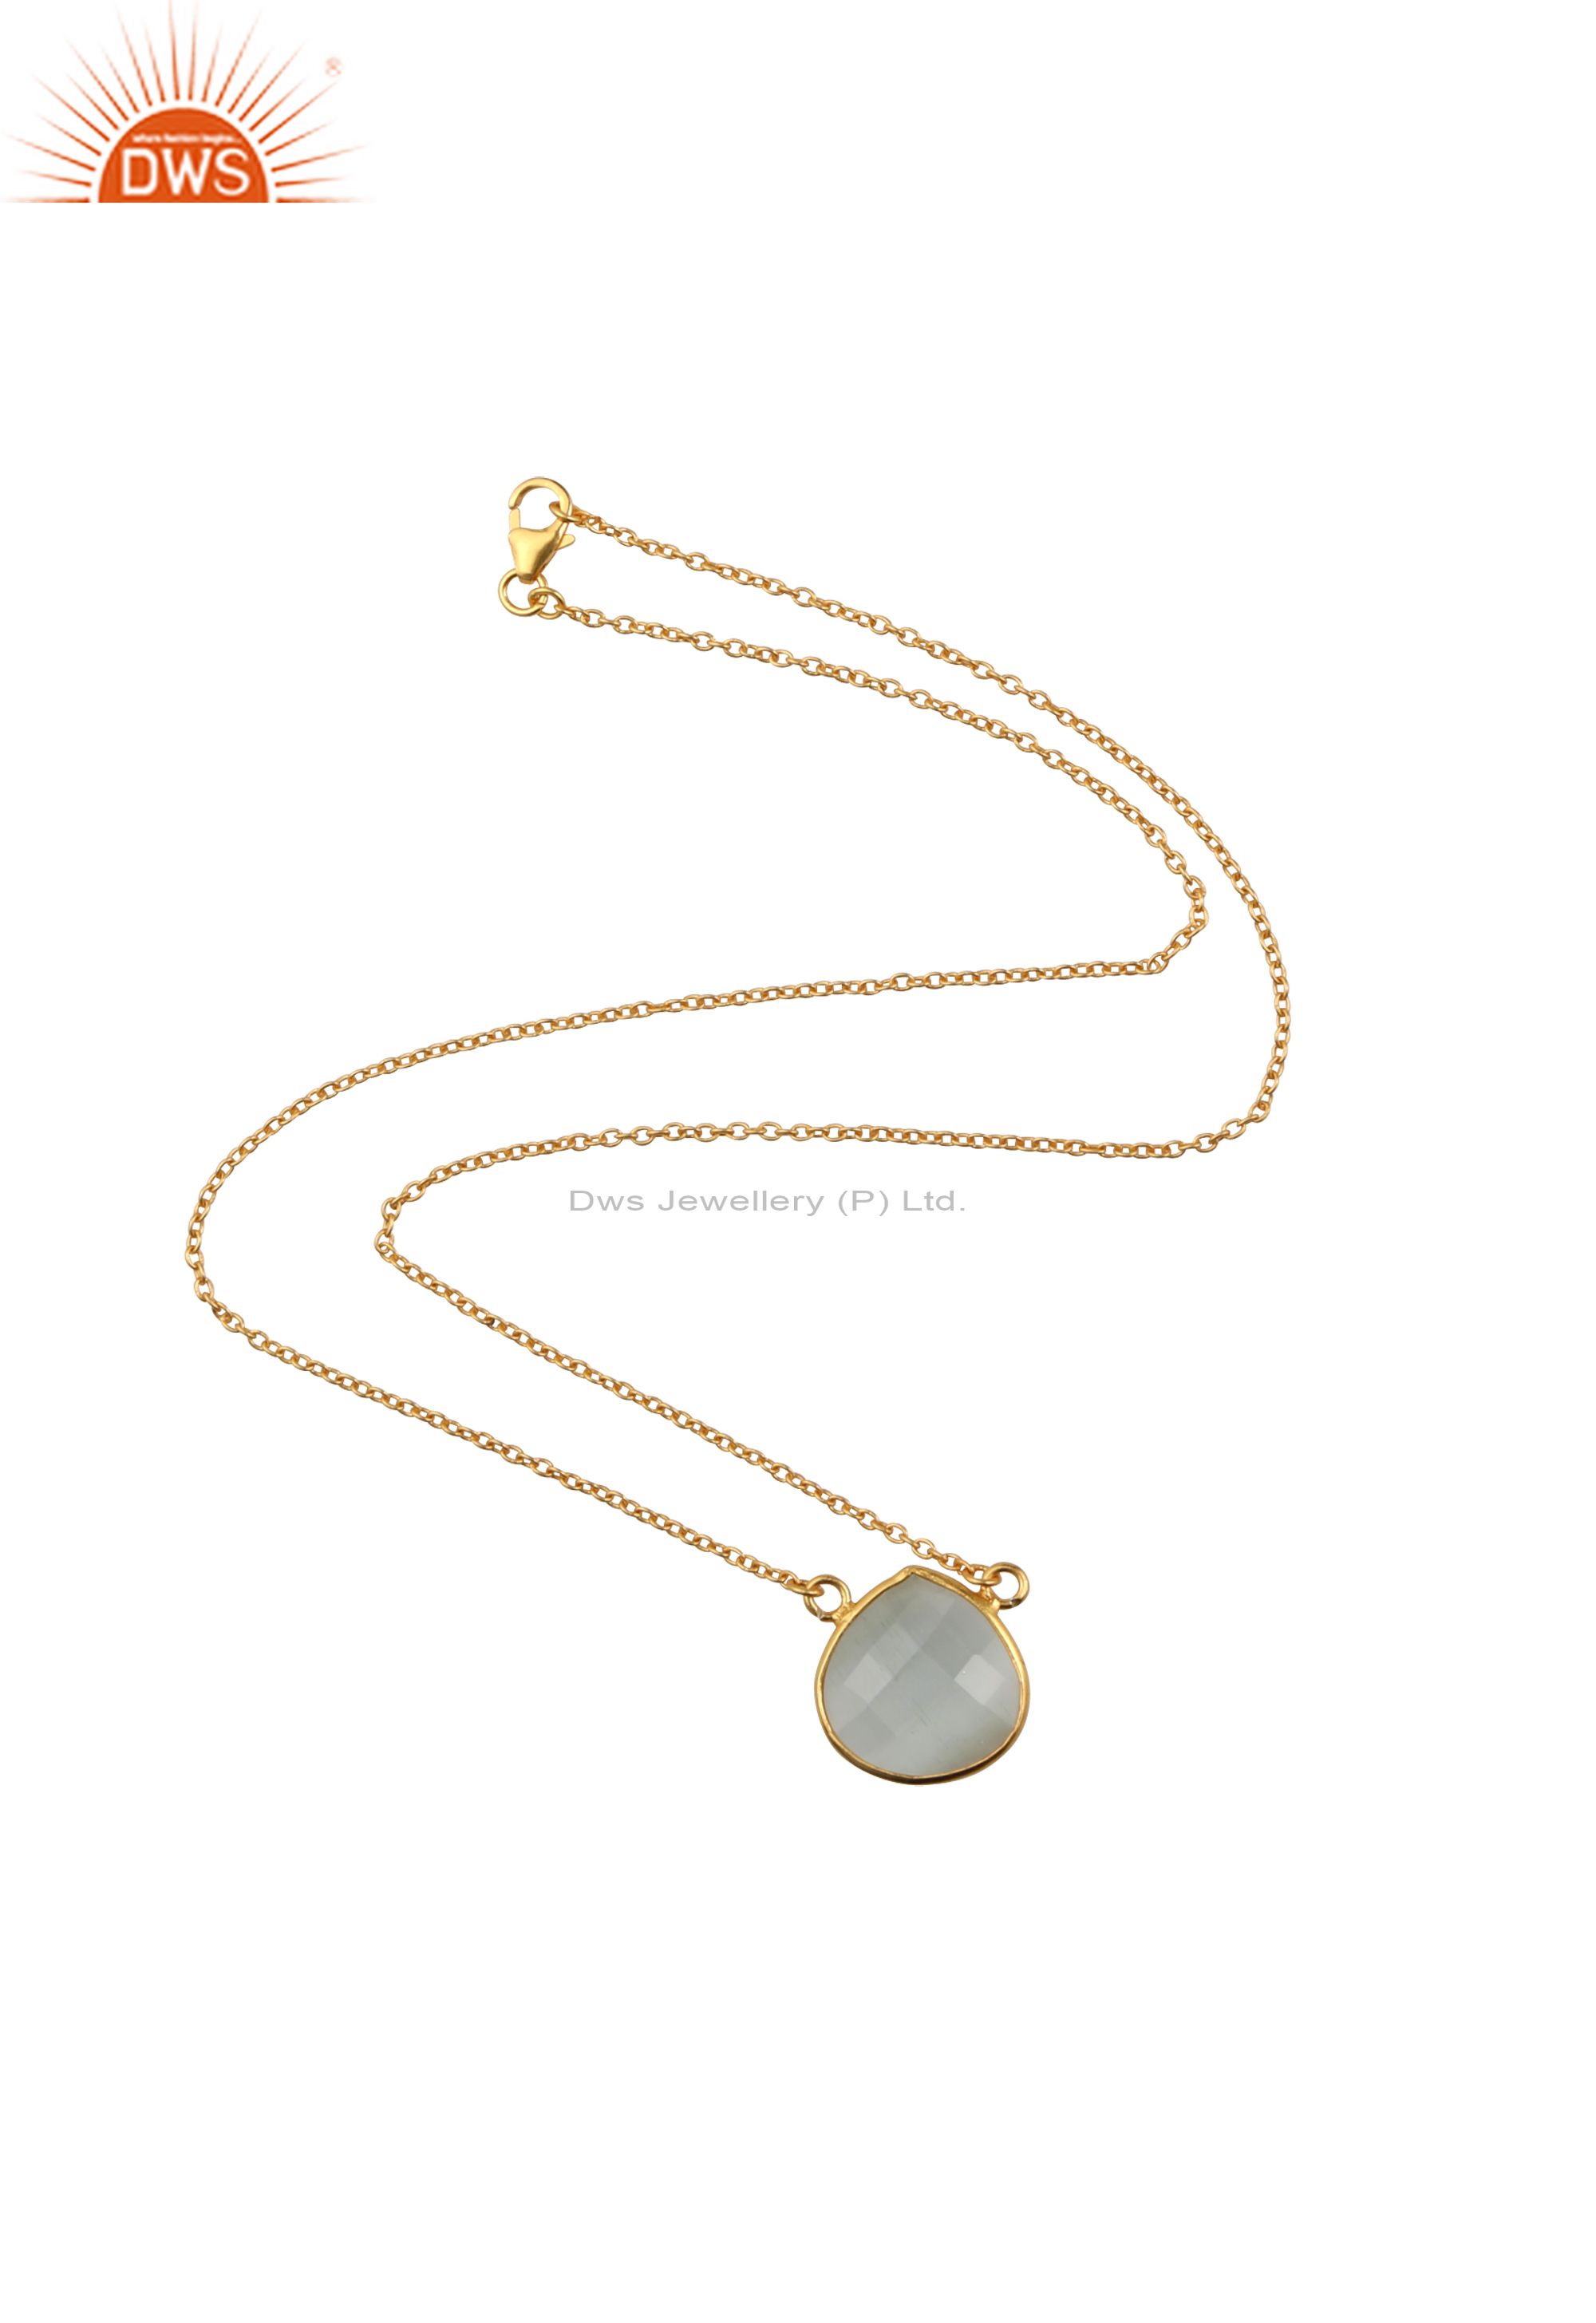 18k yellow gold plated sterling silver white moonstone pendant chain necklace